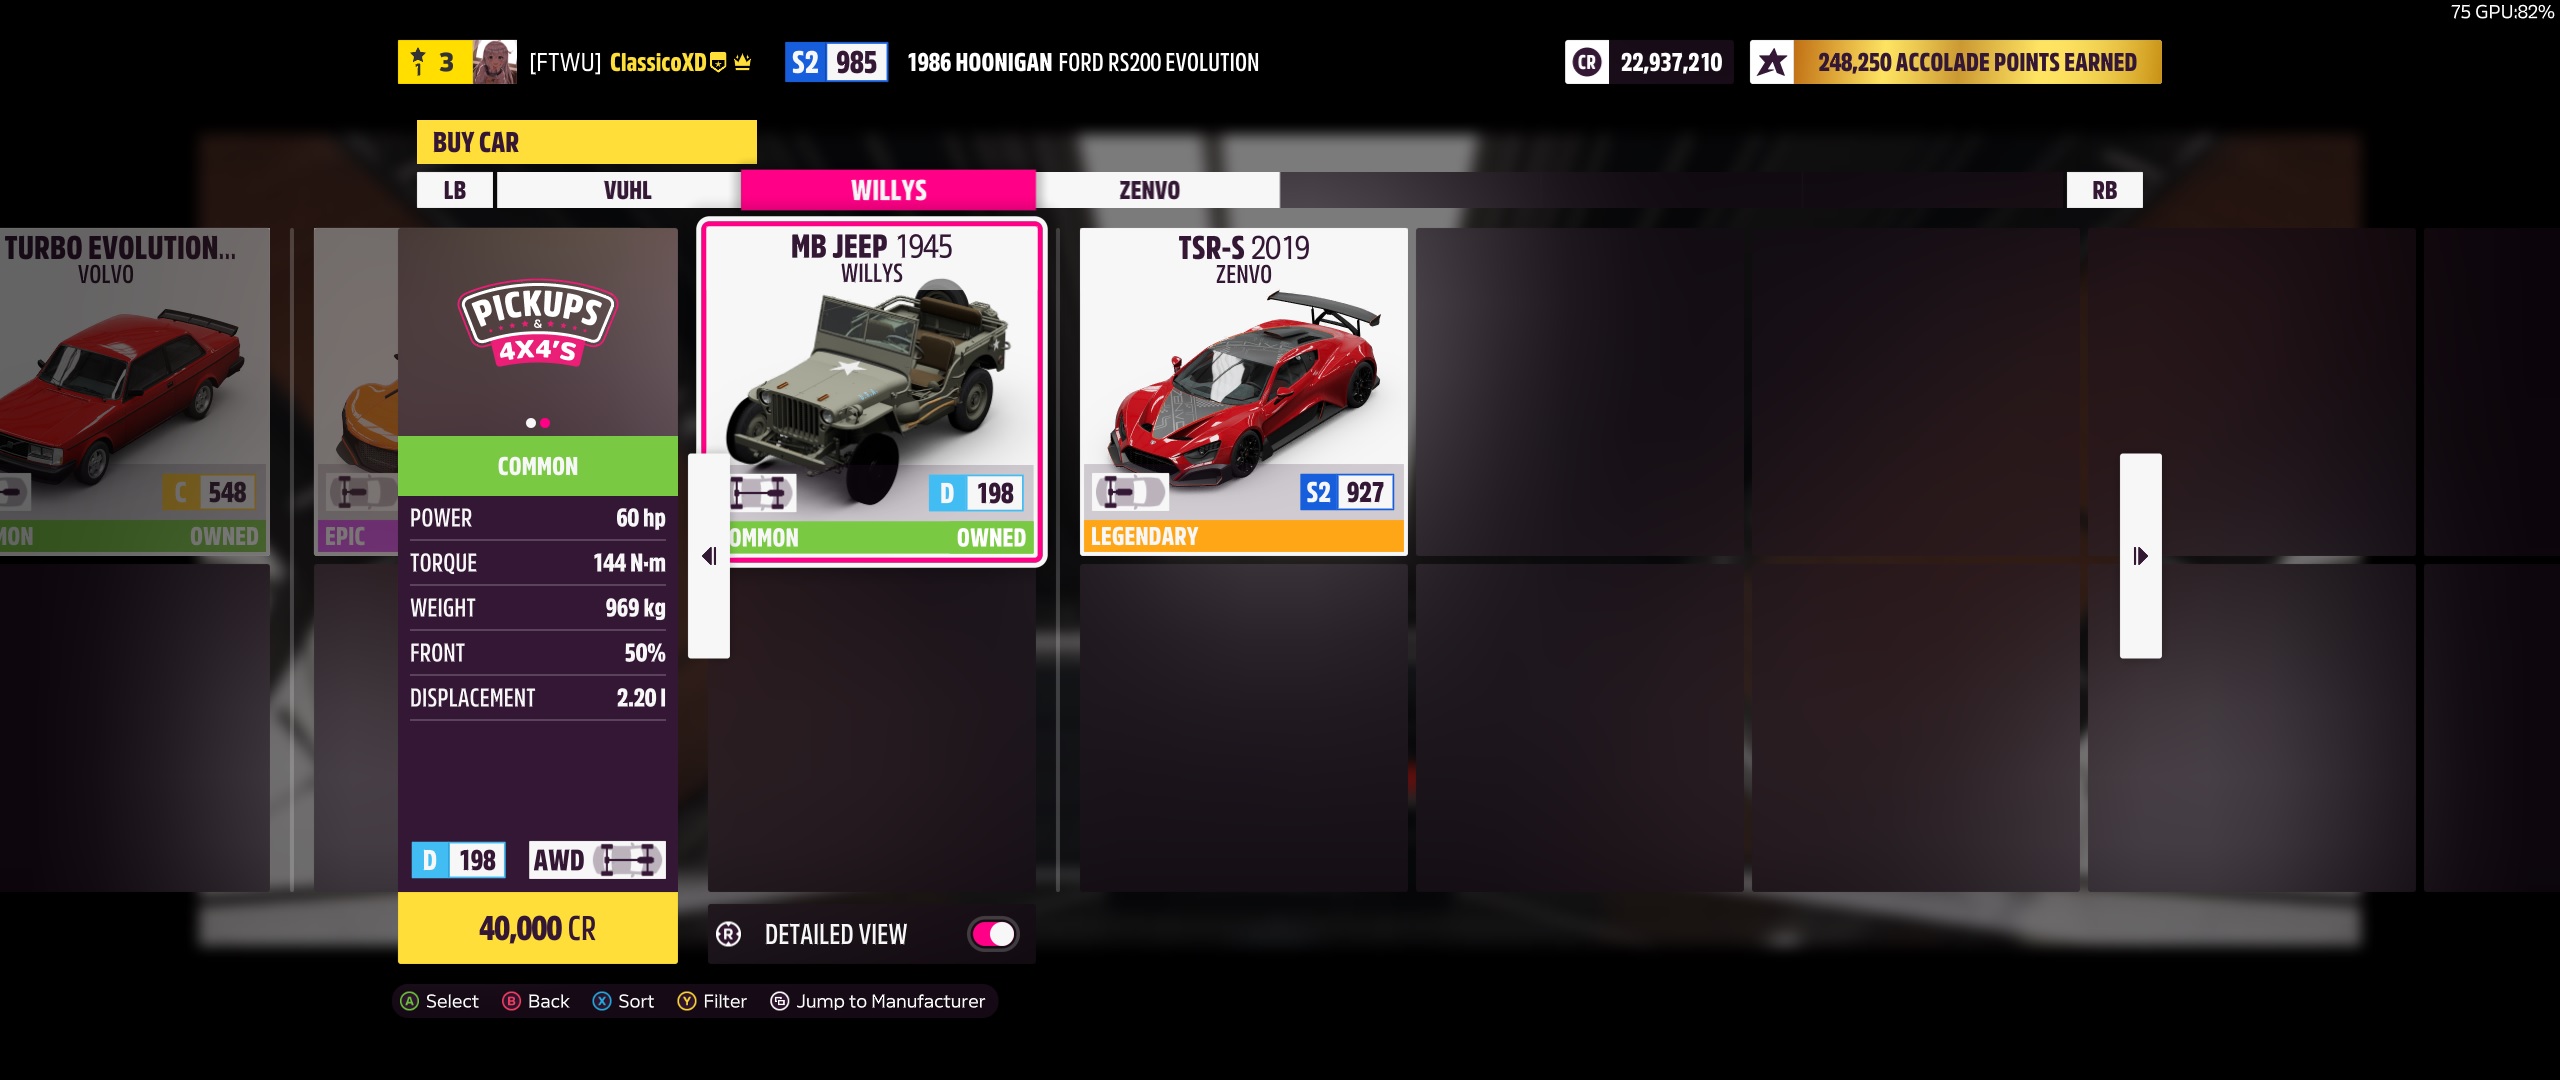 Forza Horizon 5 Tips How to Farm Super Wheelspins - Purchasing the Required Car - E1C51A1